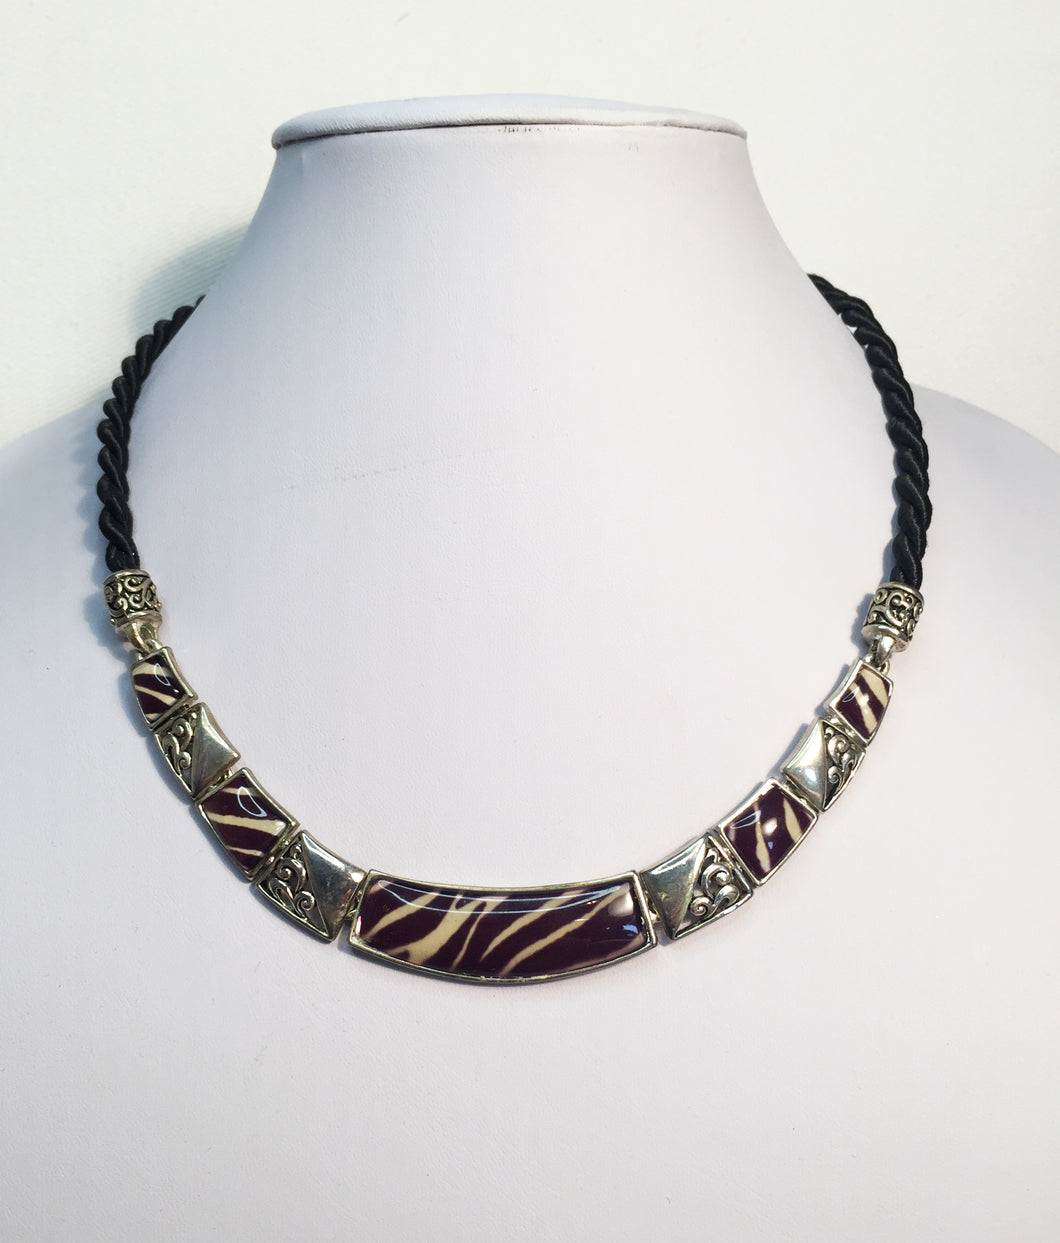 Zebra patterned necklace with Silver filigree